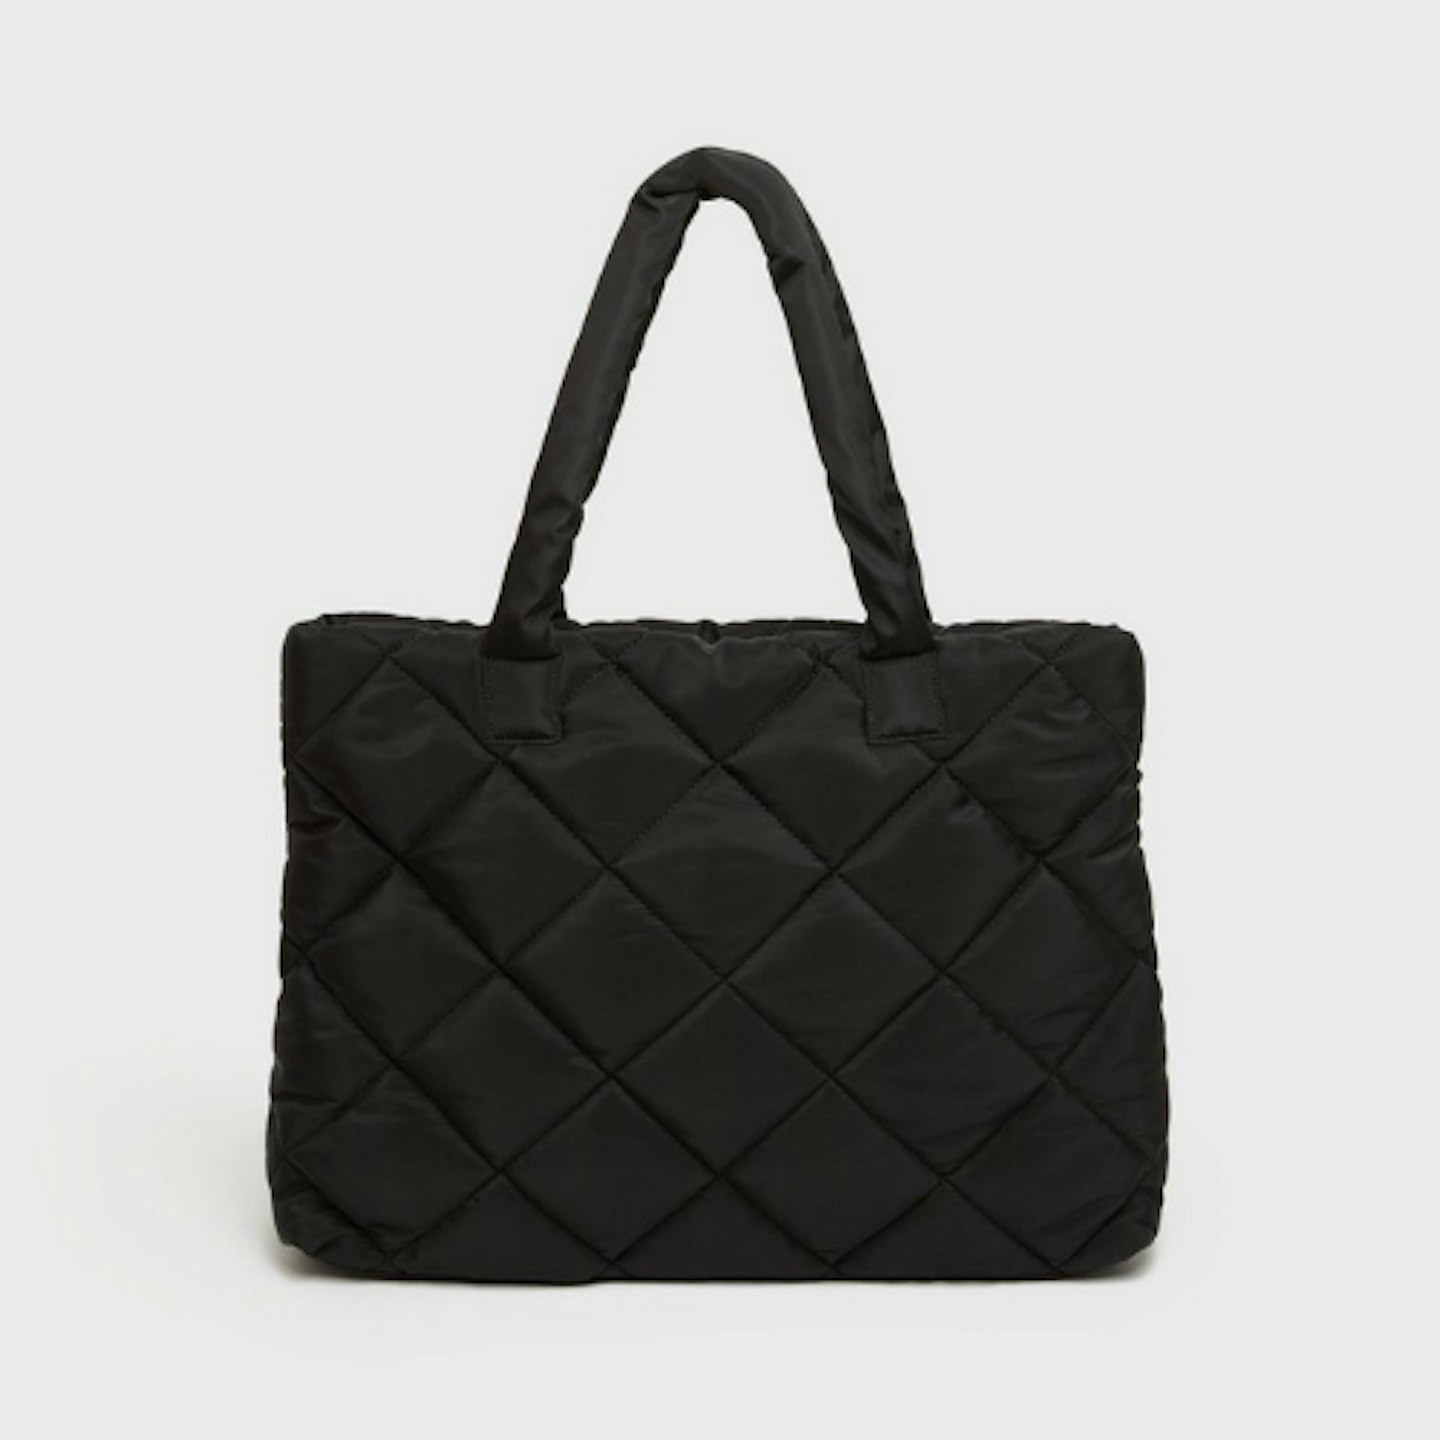 Black quilted bag on white background